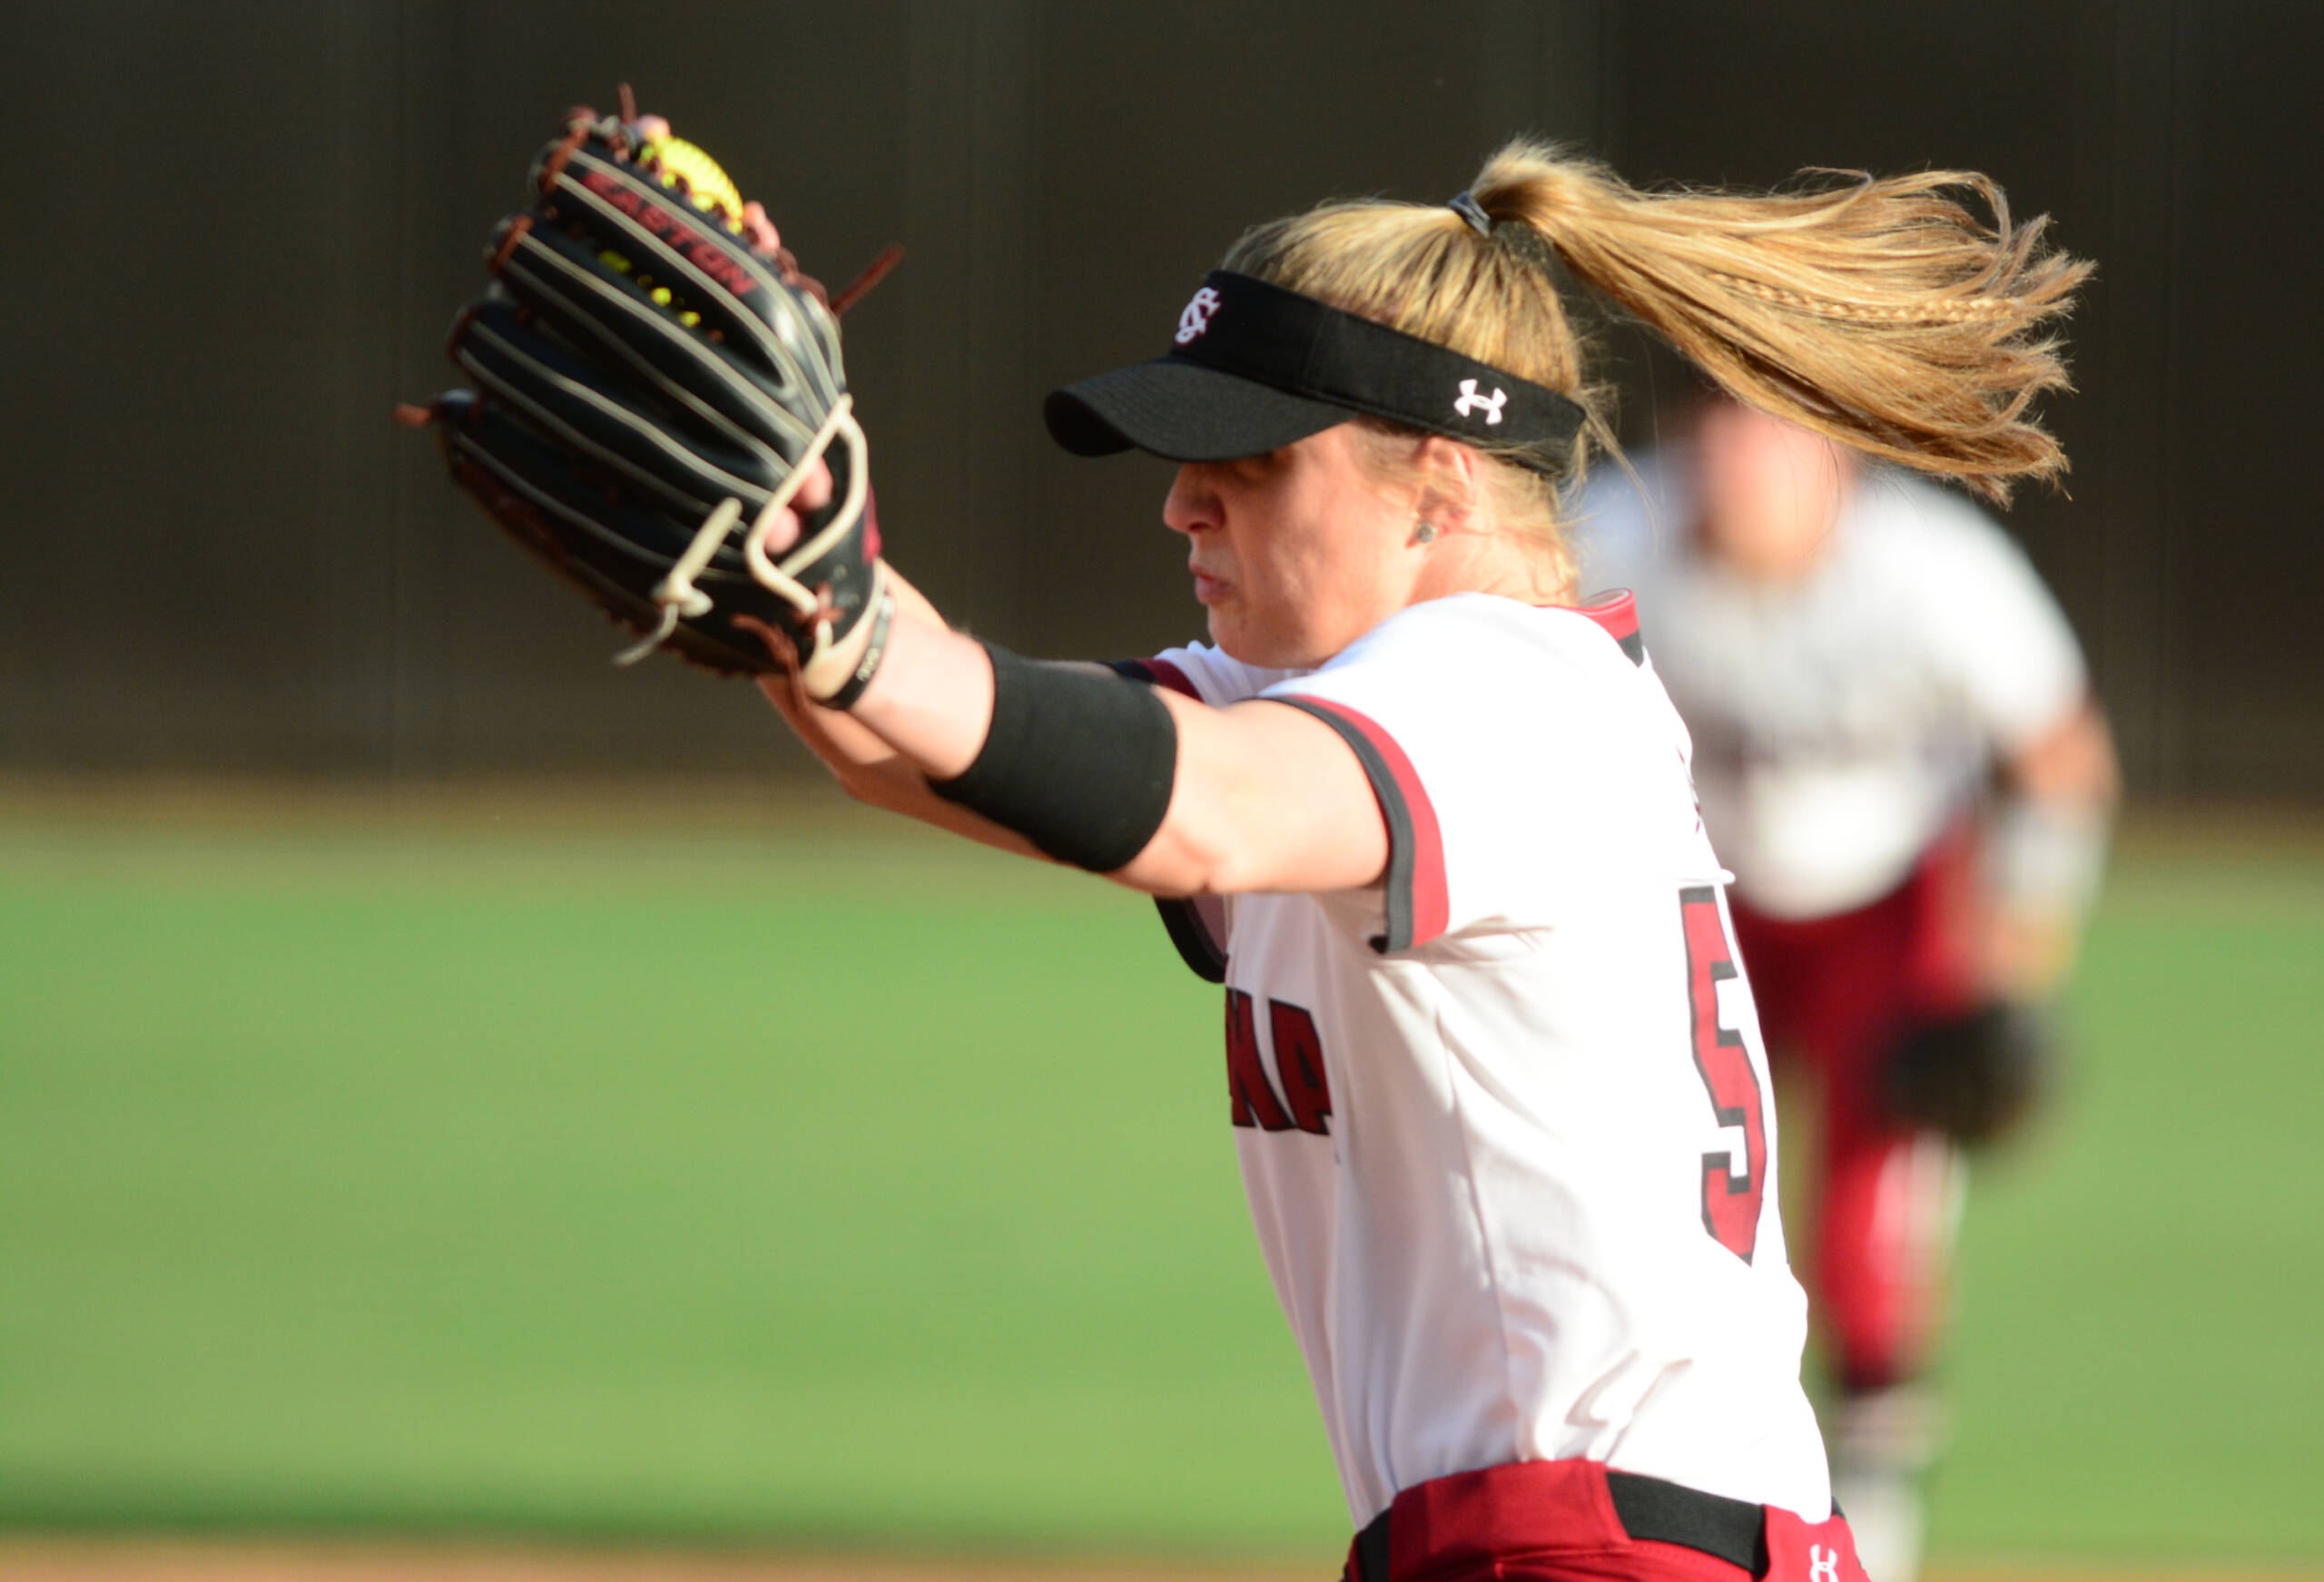 Homers And Dominant Pitching Lead Gamecocks To Victory Over Winthrop